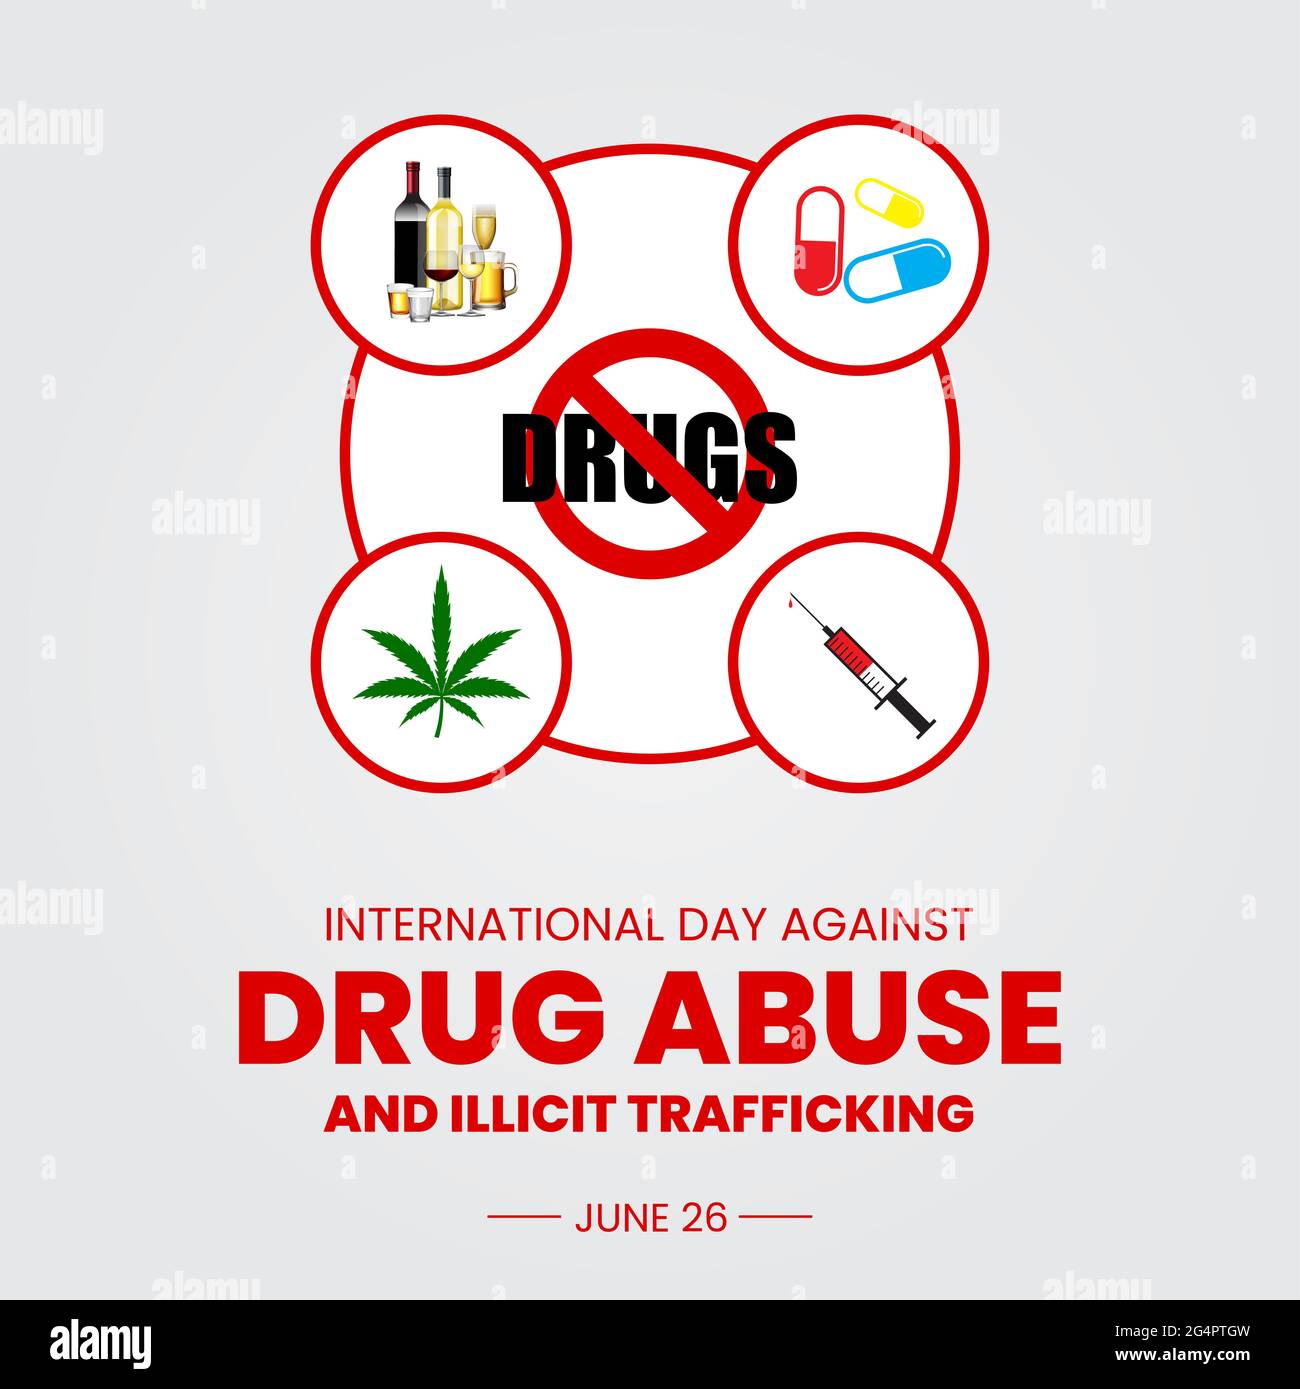 International Day against Drug Abuse and Illicit Trafficking Stock Photo